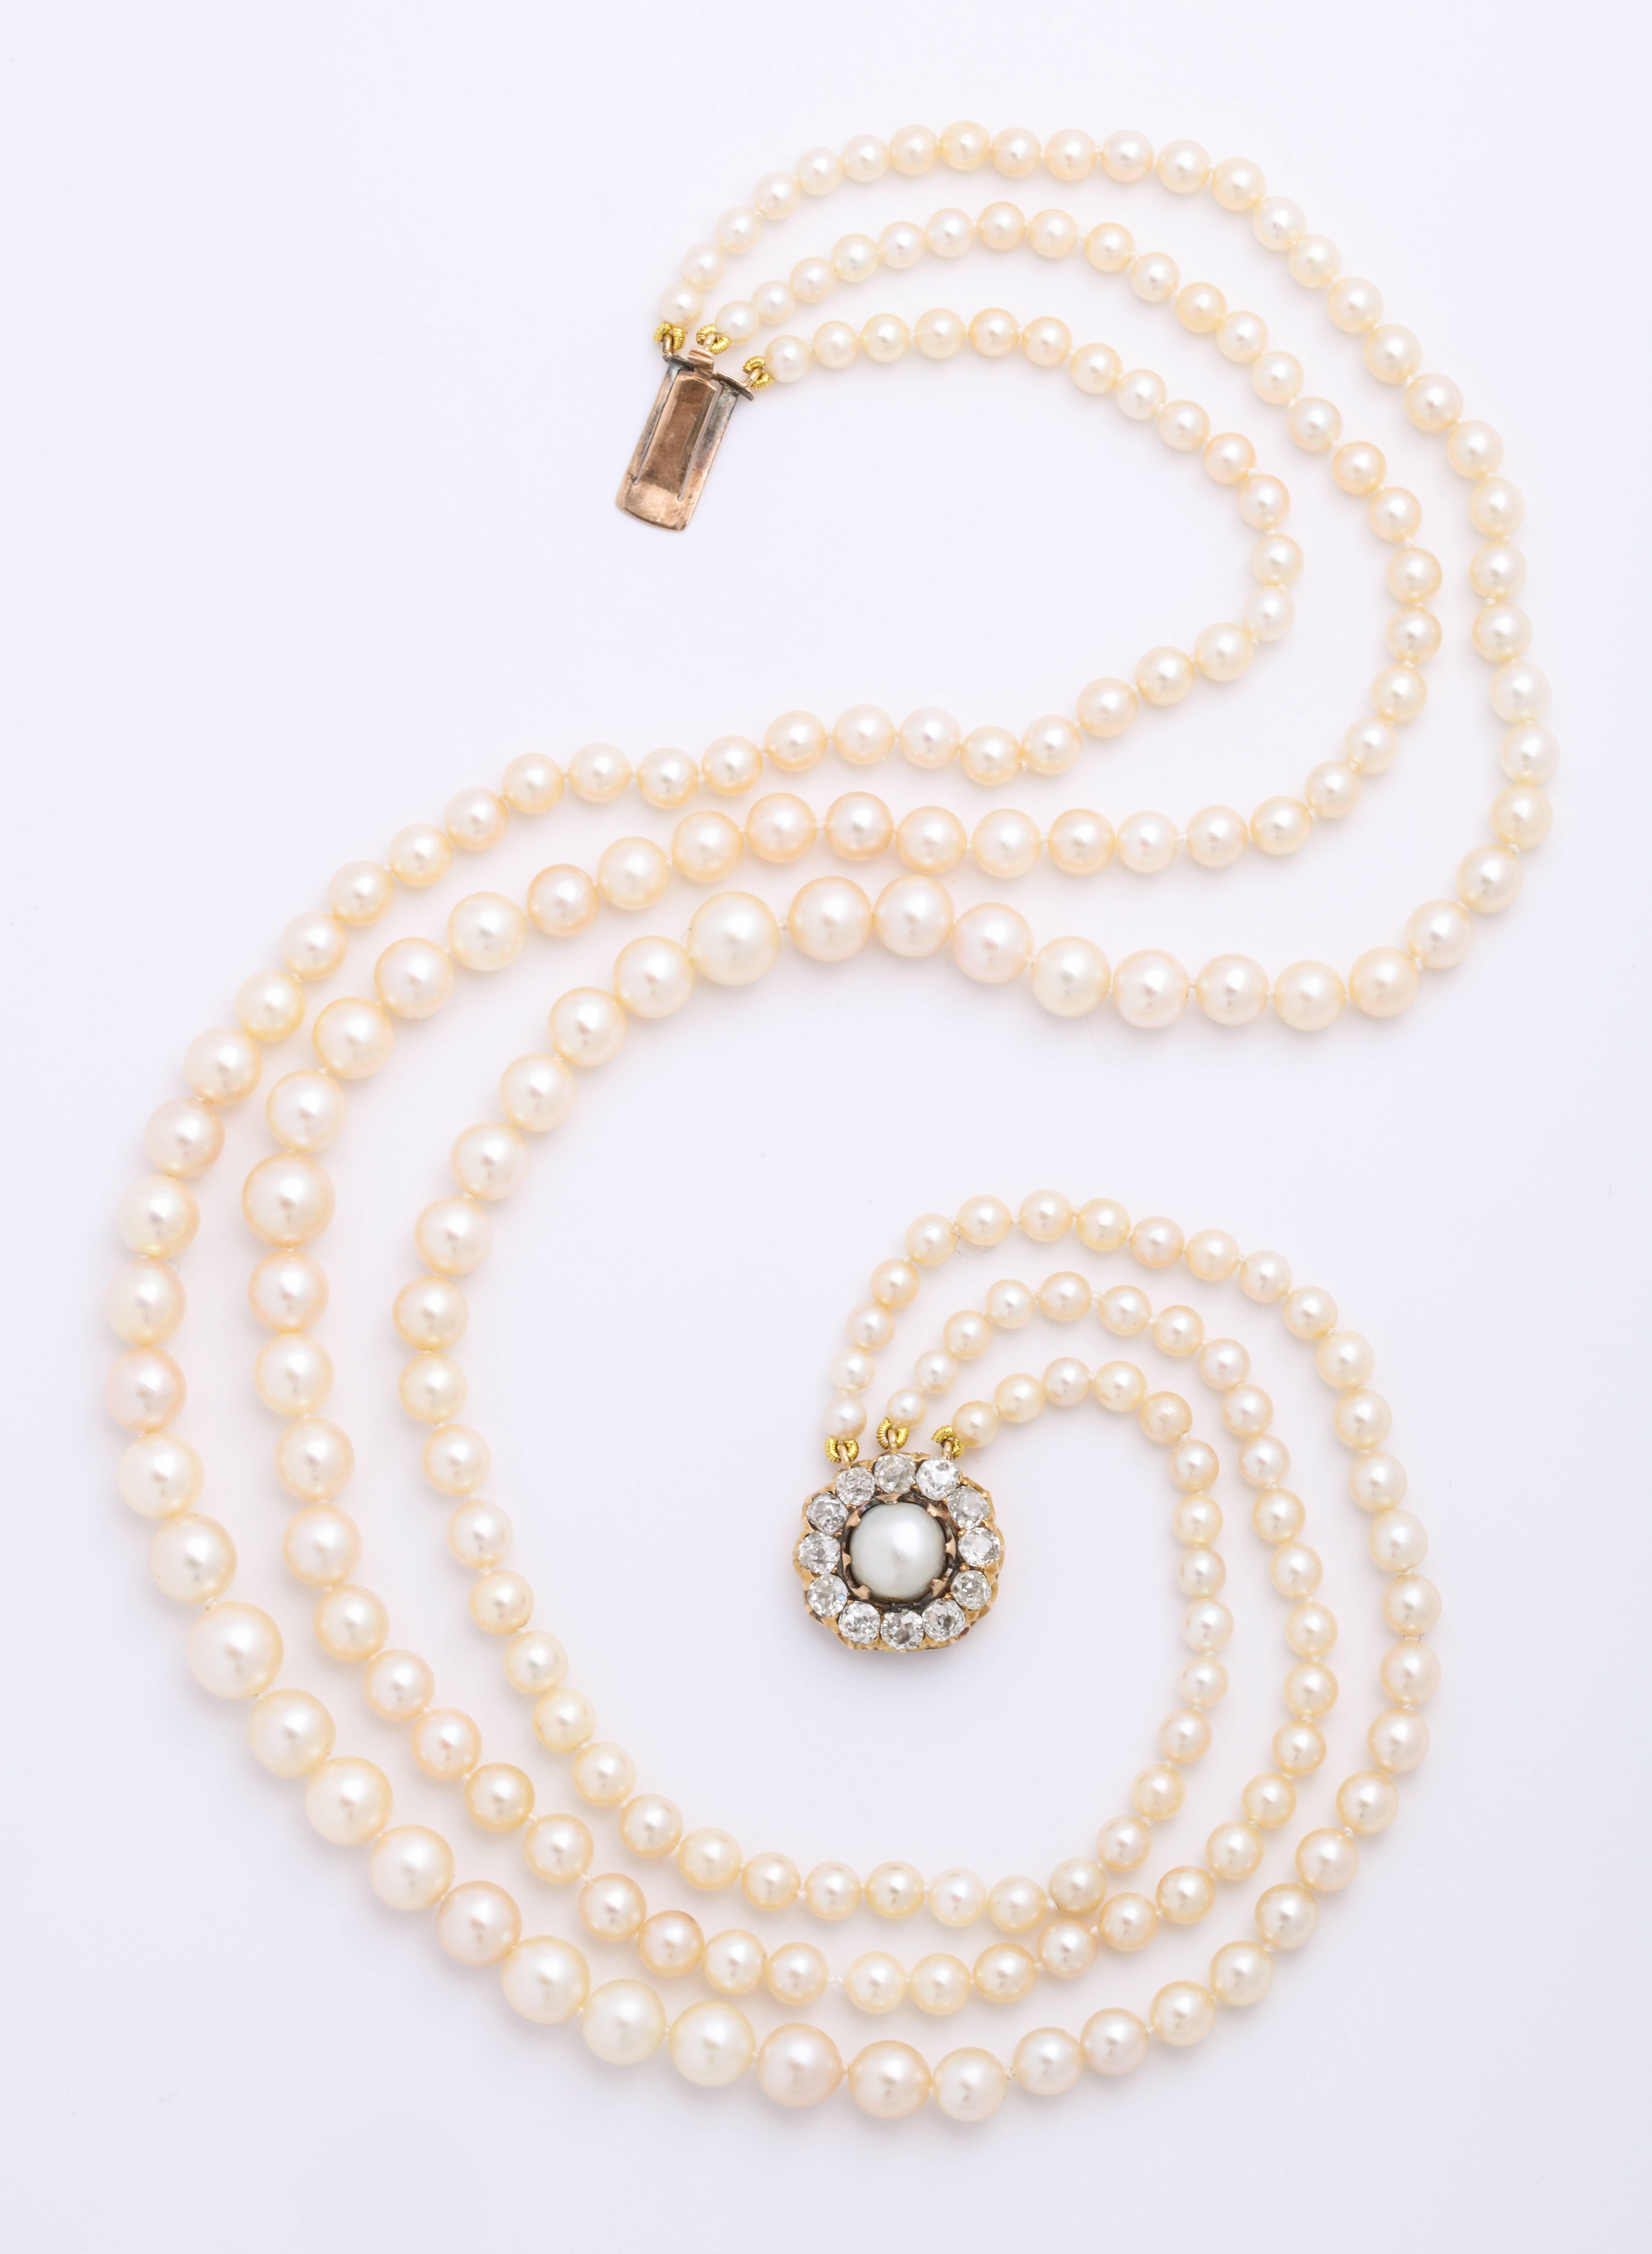 Old Mine Cut Cultured Pearl Necklace with Antique Diamond Clasp